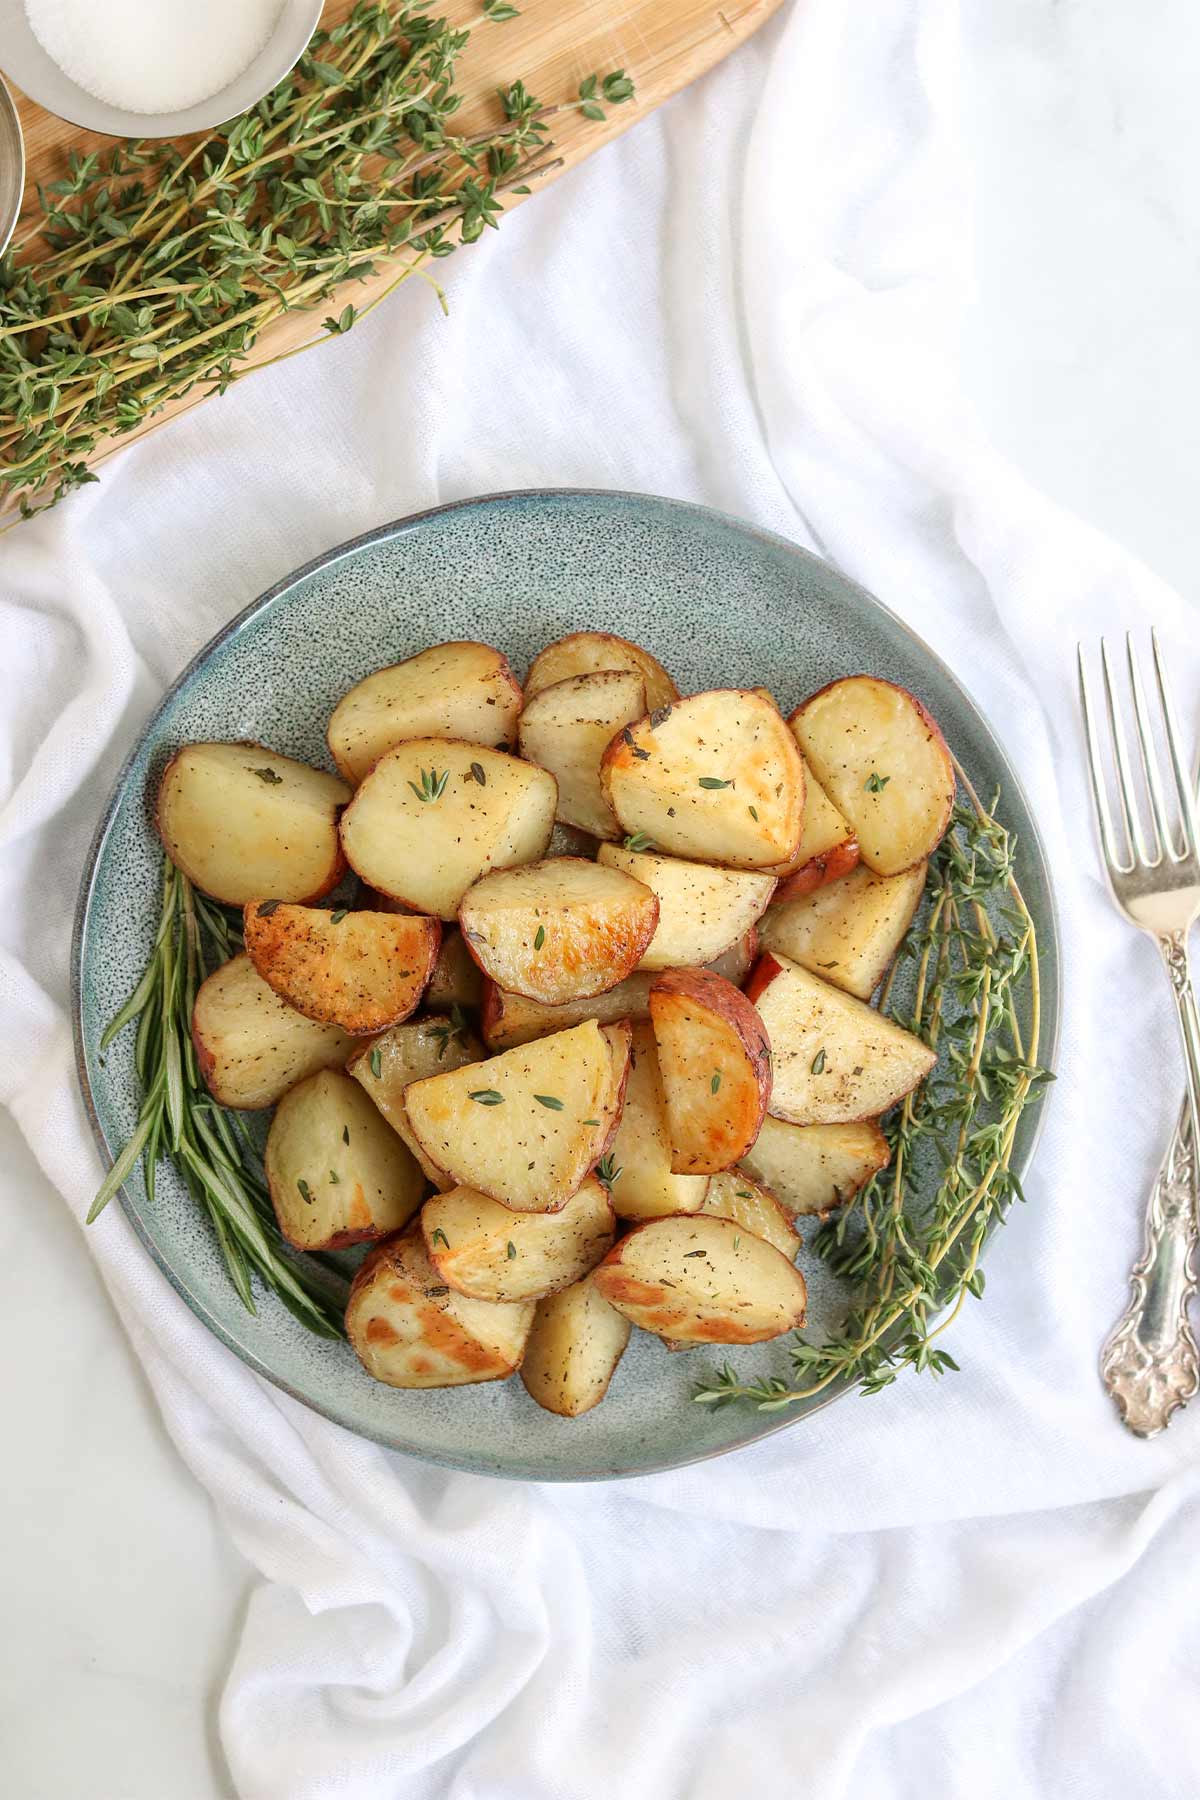 Roasted rosemary potatoes on a plate.